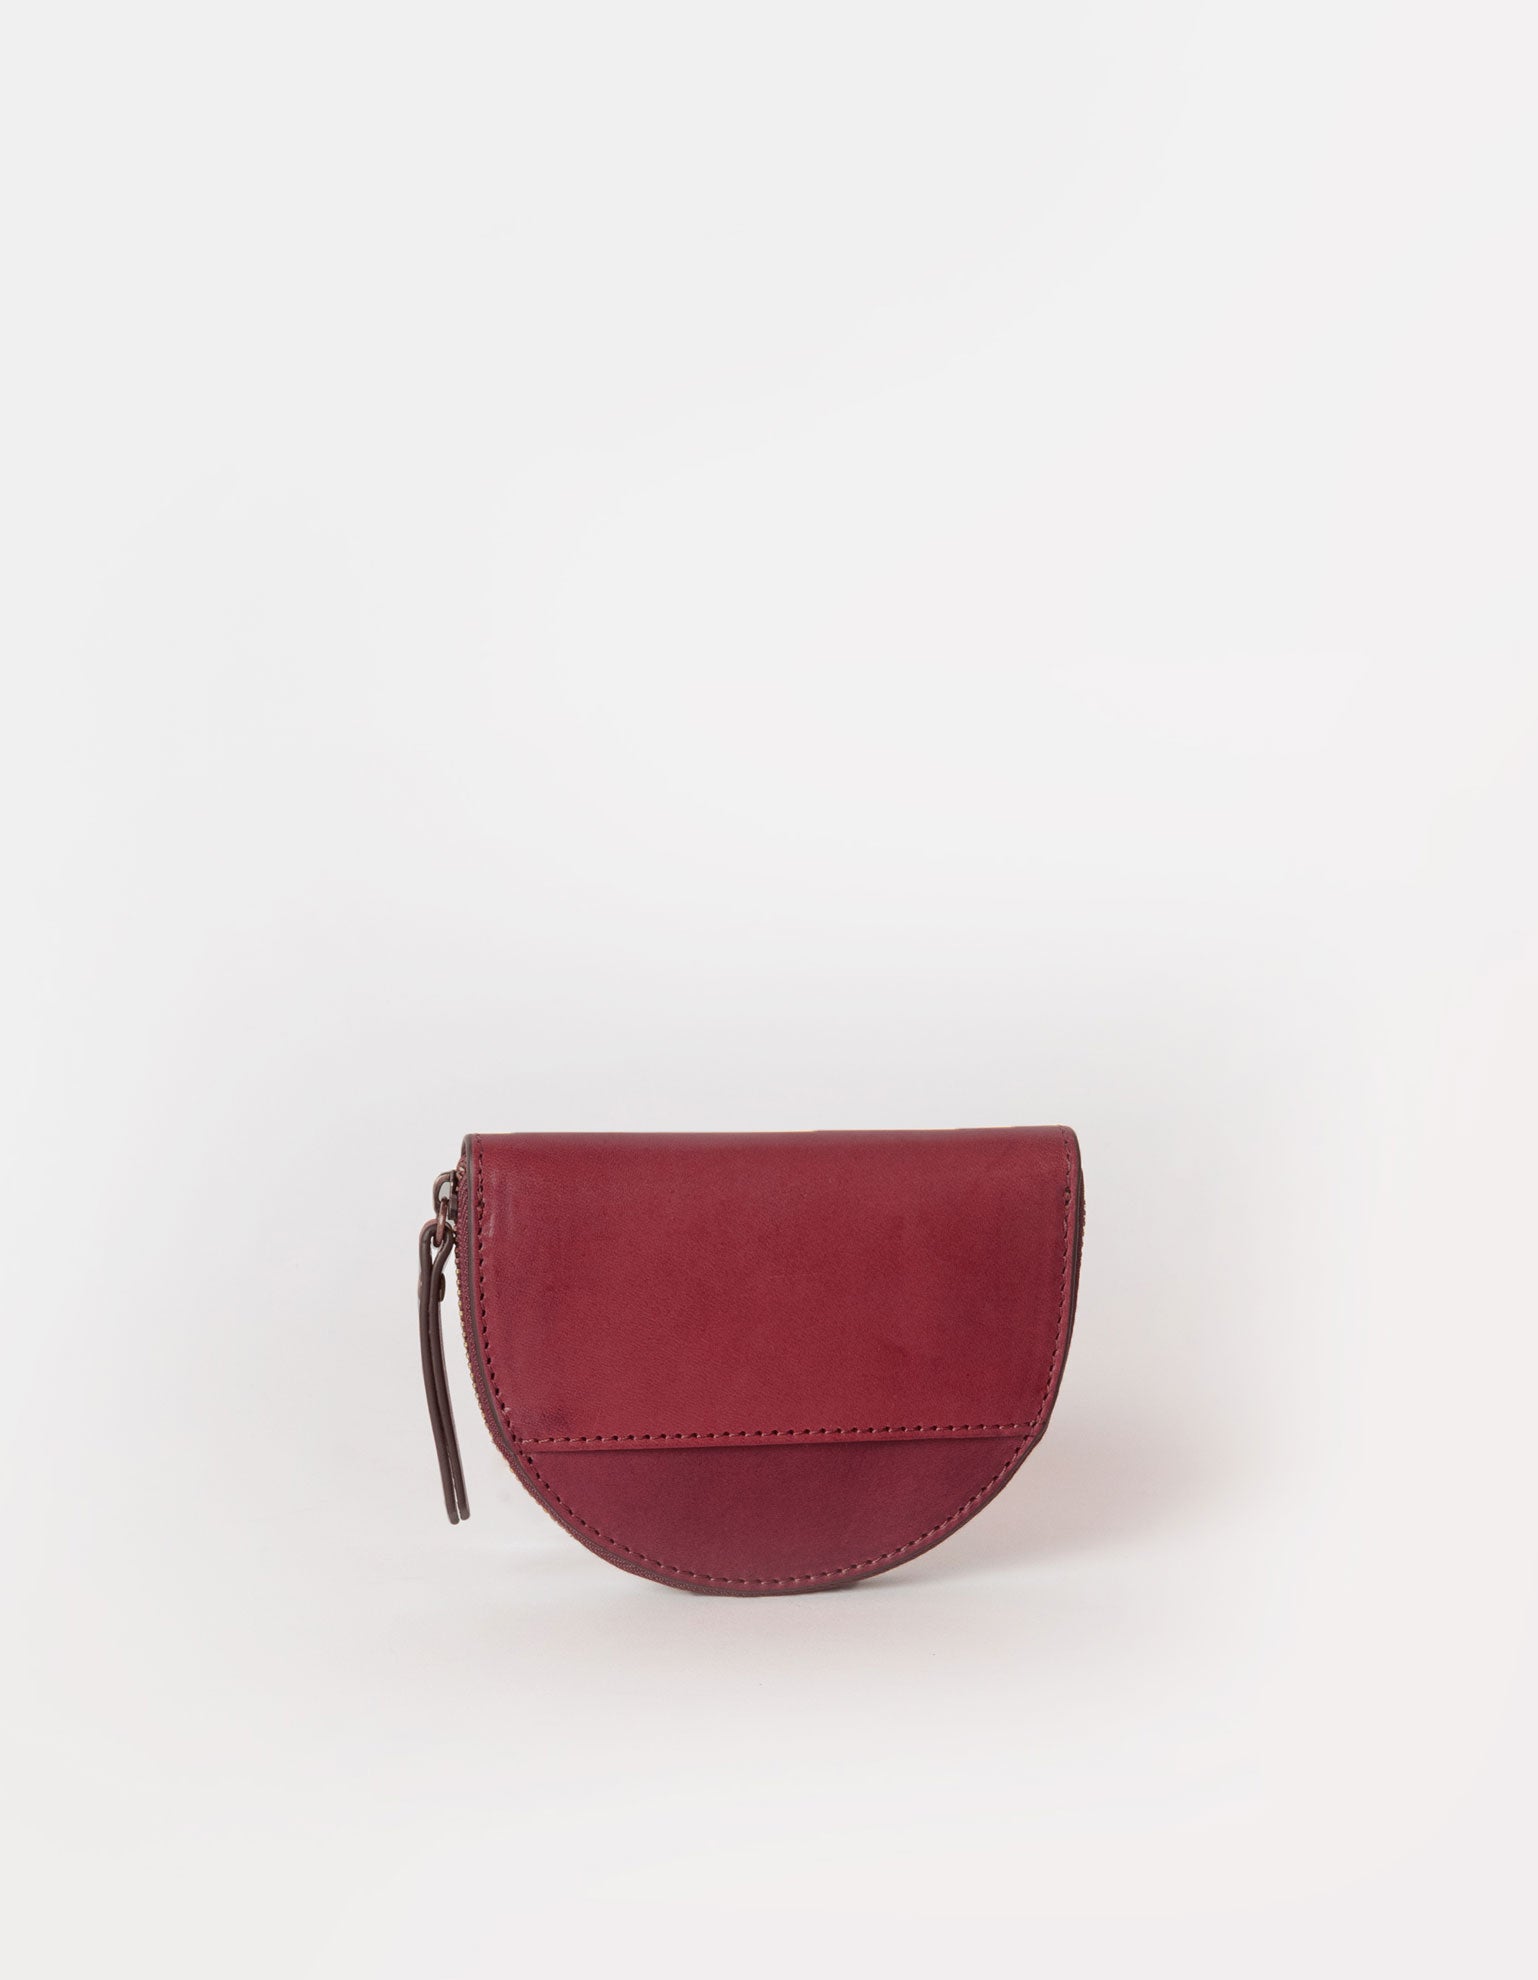 Laura Coin Purse in Ruby Classic Leather. Back product image.